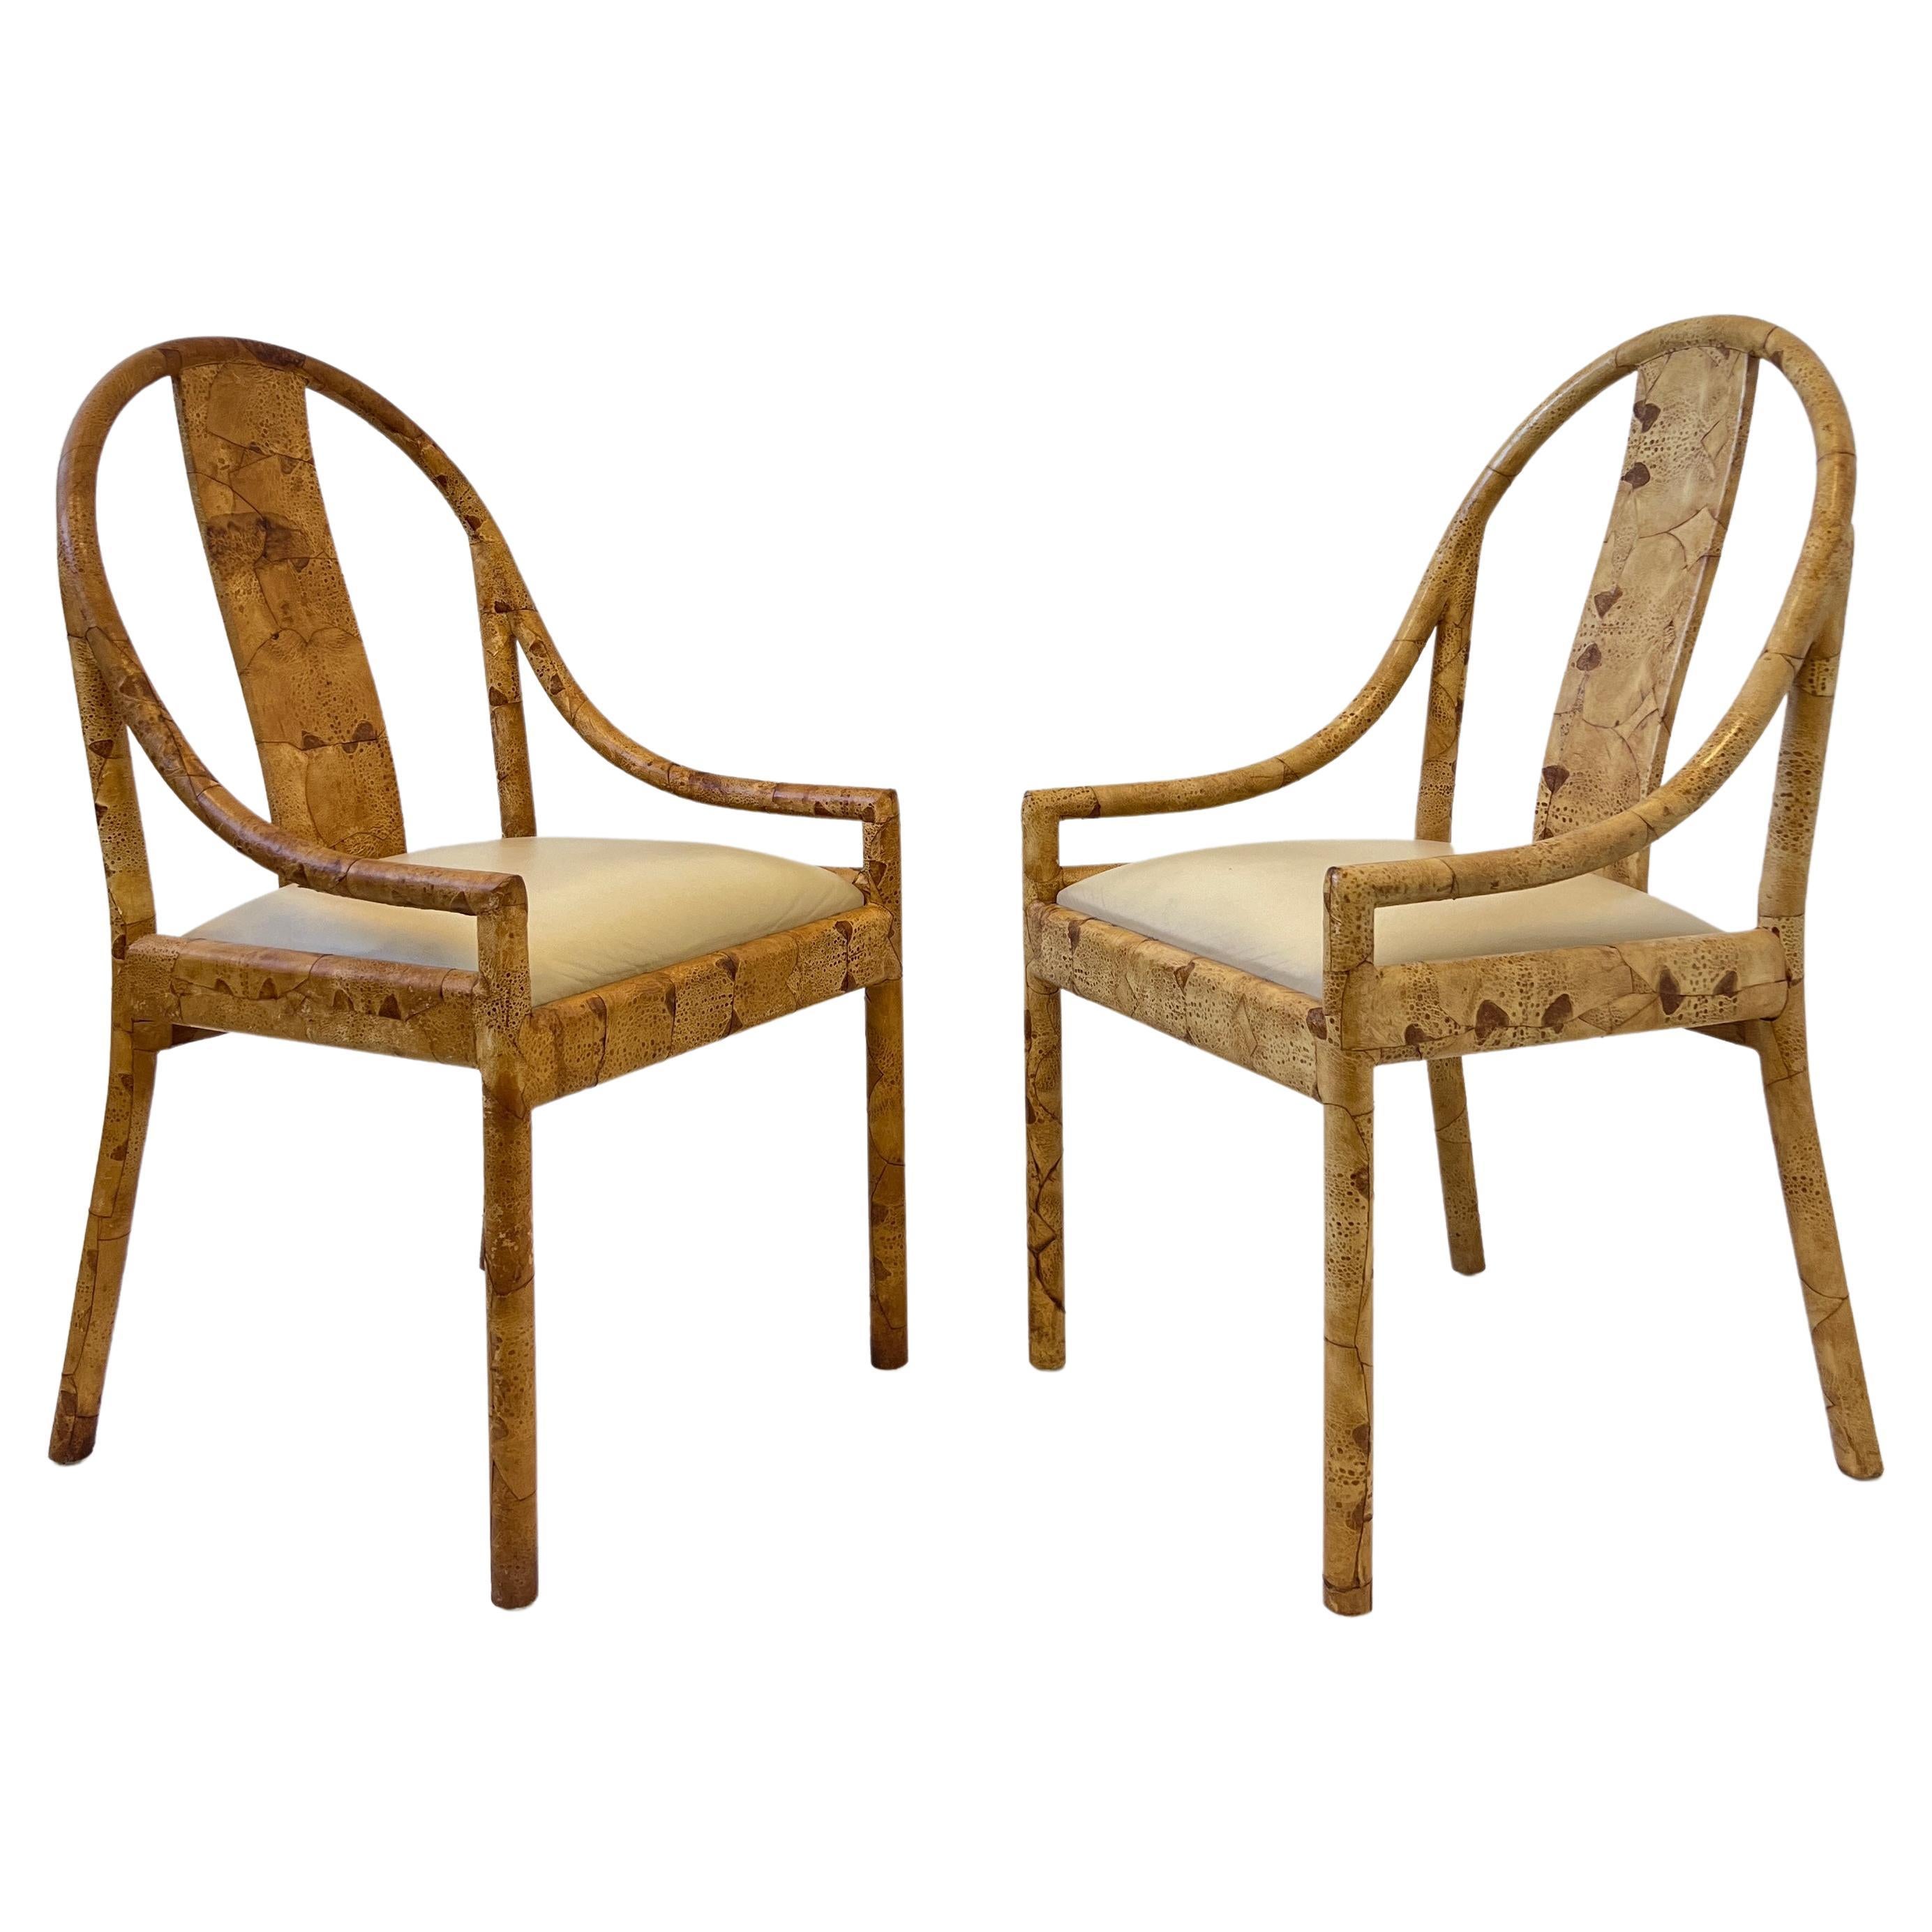 Pair of Toad Leather Patchwork Armchairs